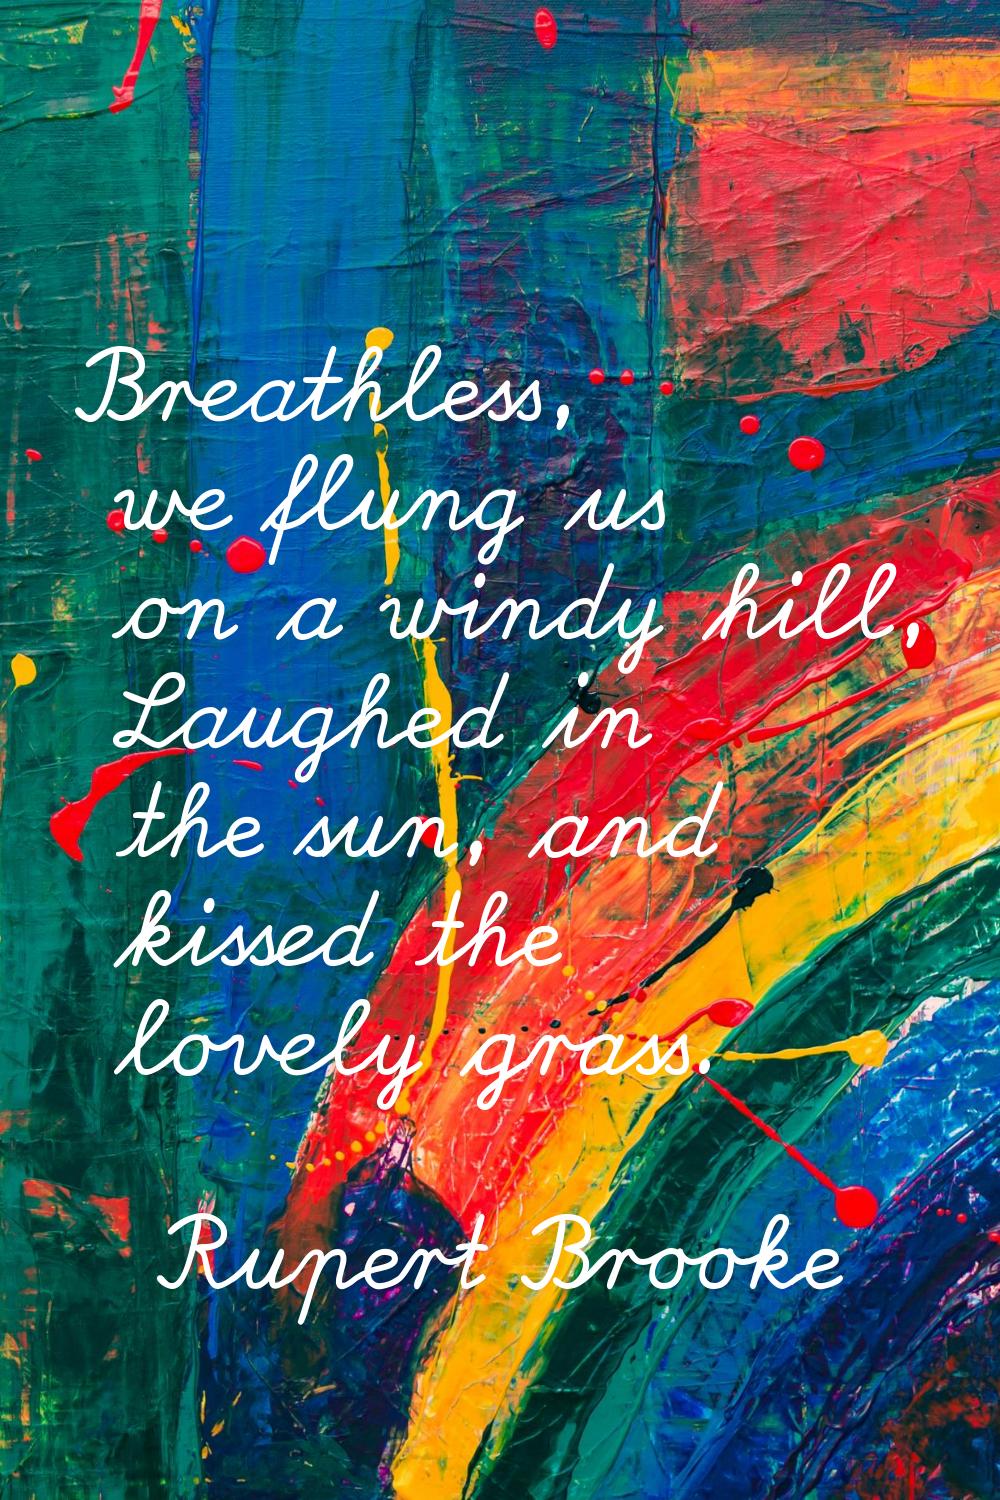 Breathless, we flung us on a windy hill, Laughed in the sun, and kissed the lovely grass.